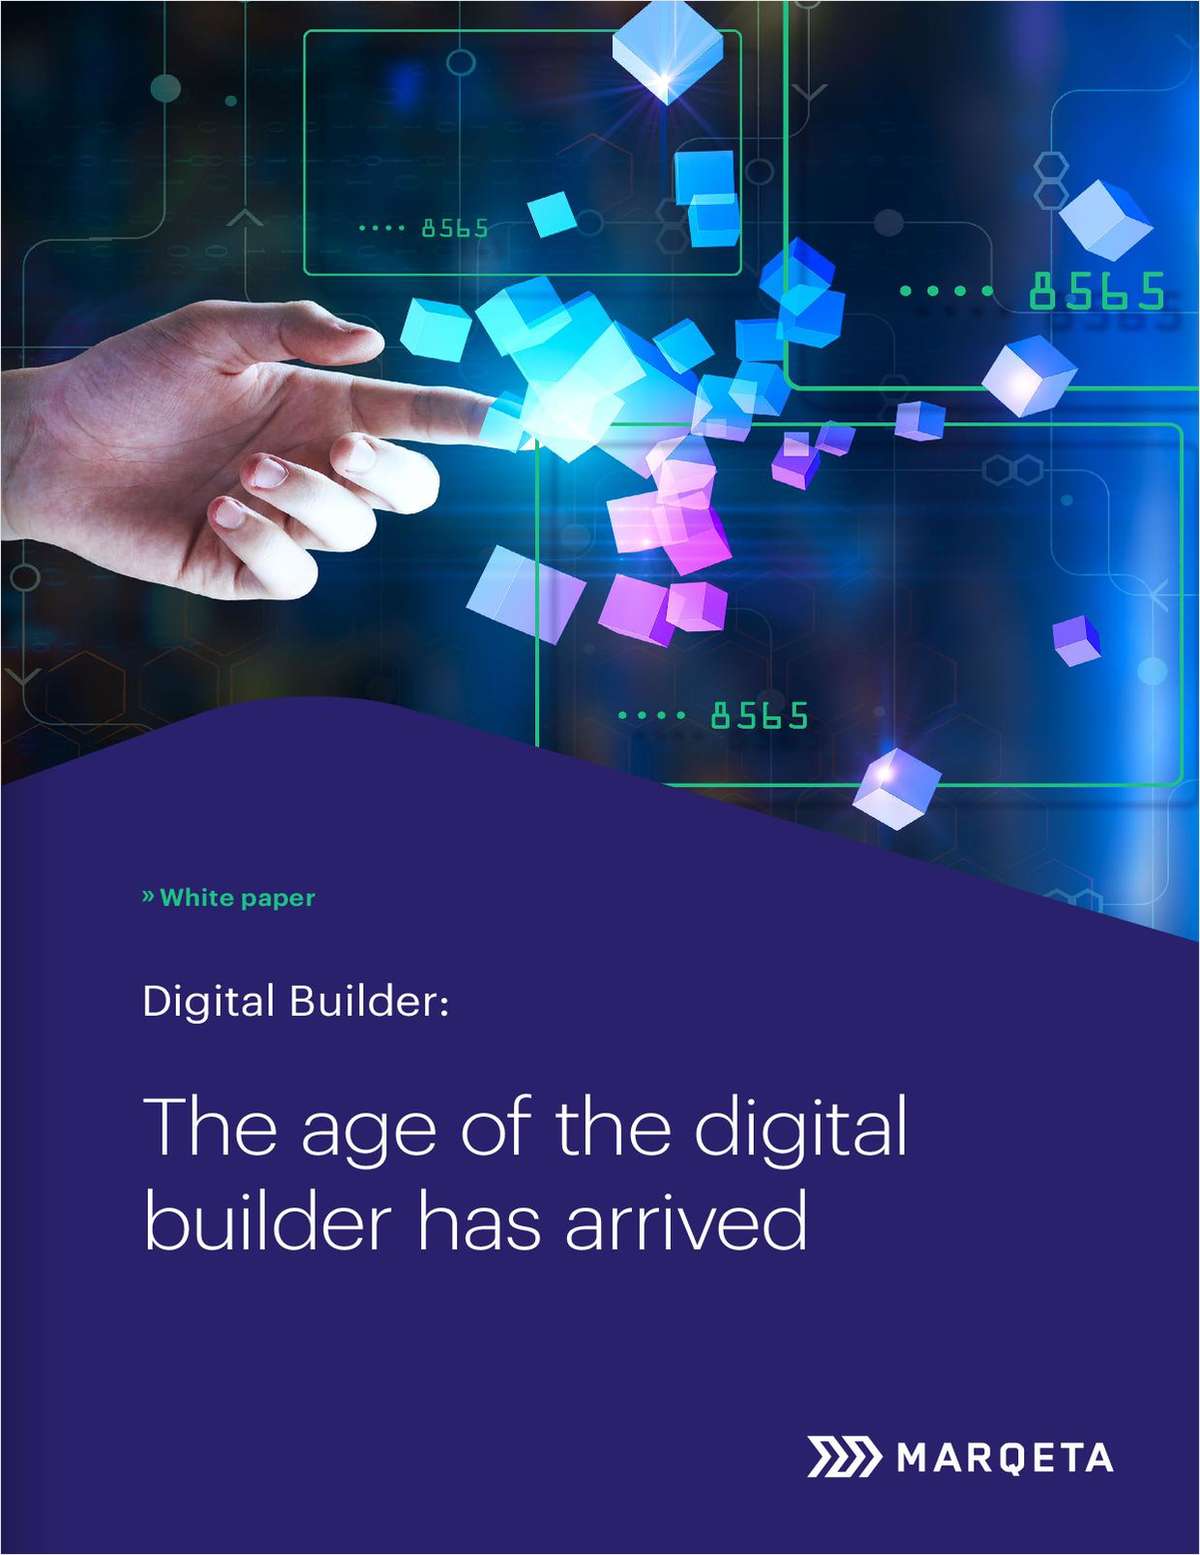 The age of the digital builder has arrived